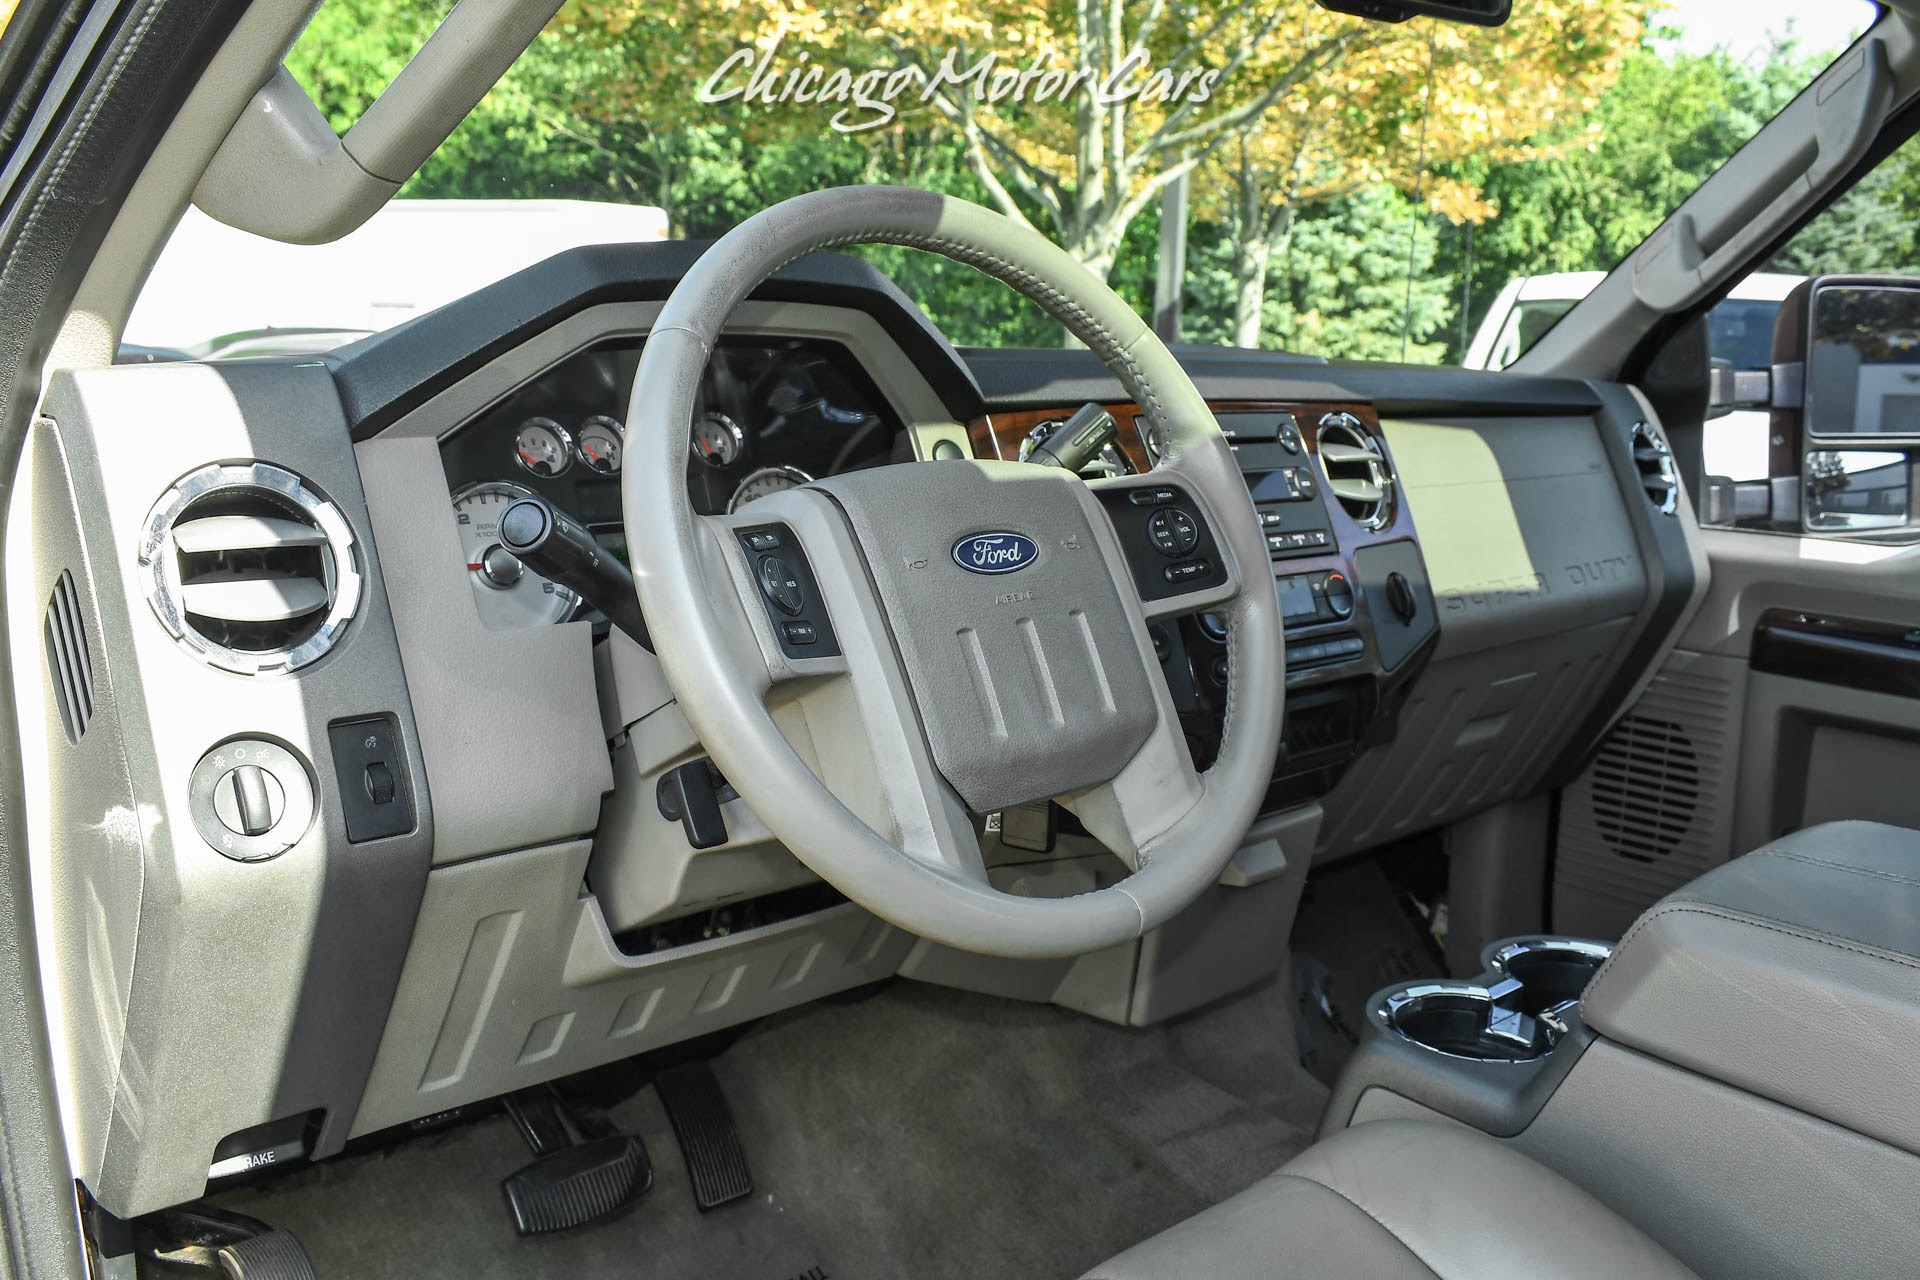 Used-2008-Ford-F350-Super-Duty-Lariat-Tow-Command-System-Diesel-V8-Engine-Heated-Captains-Chairs